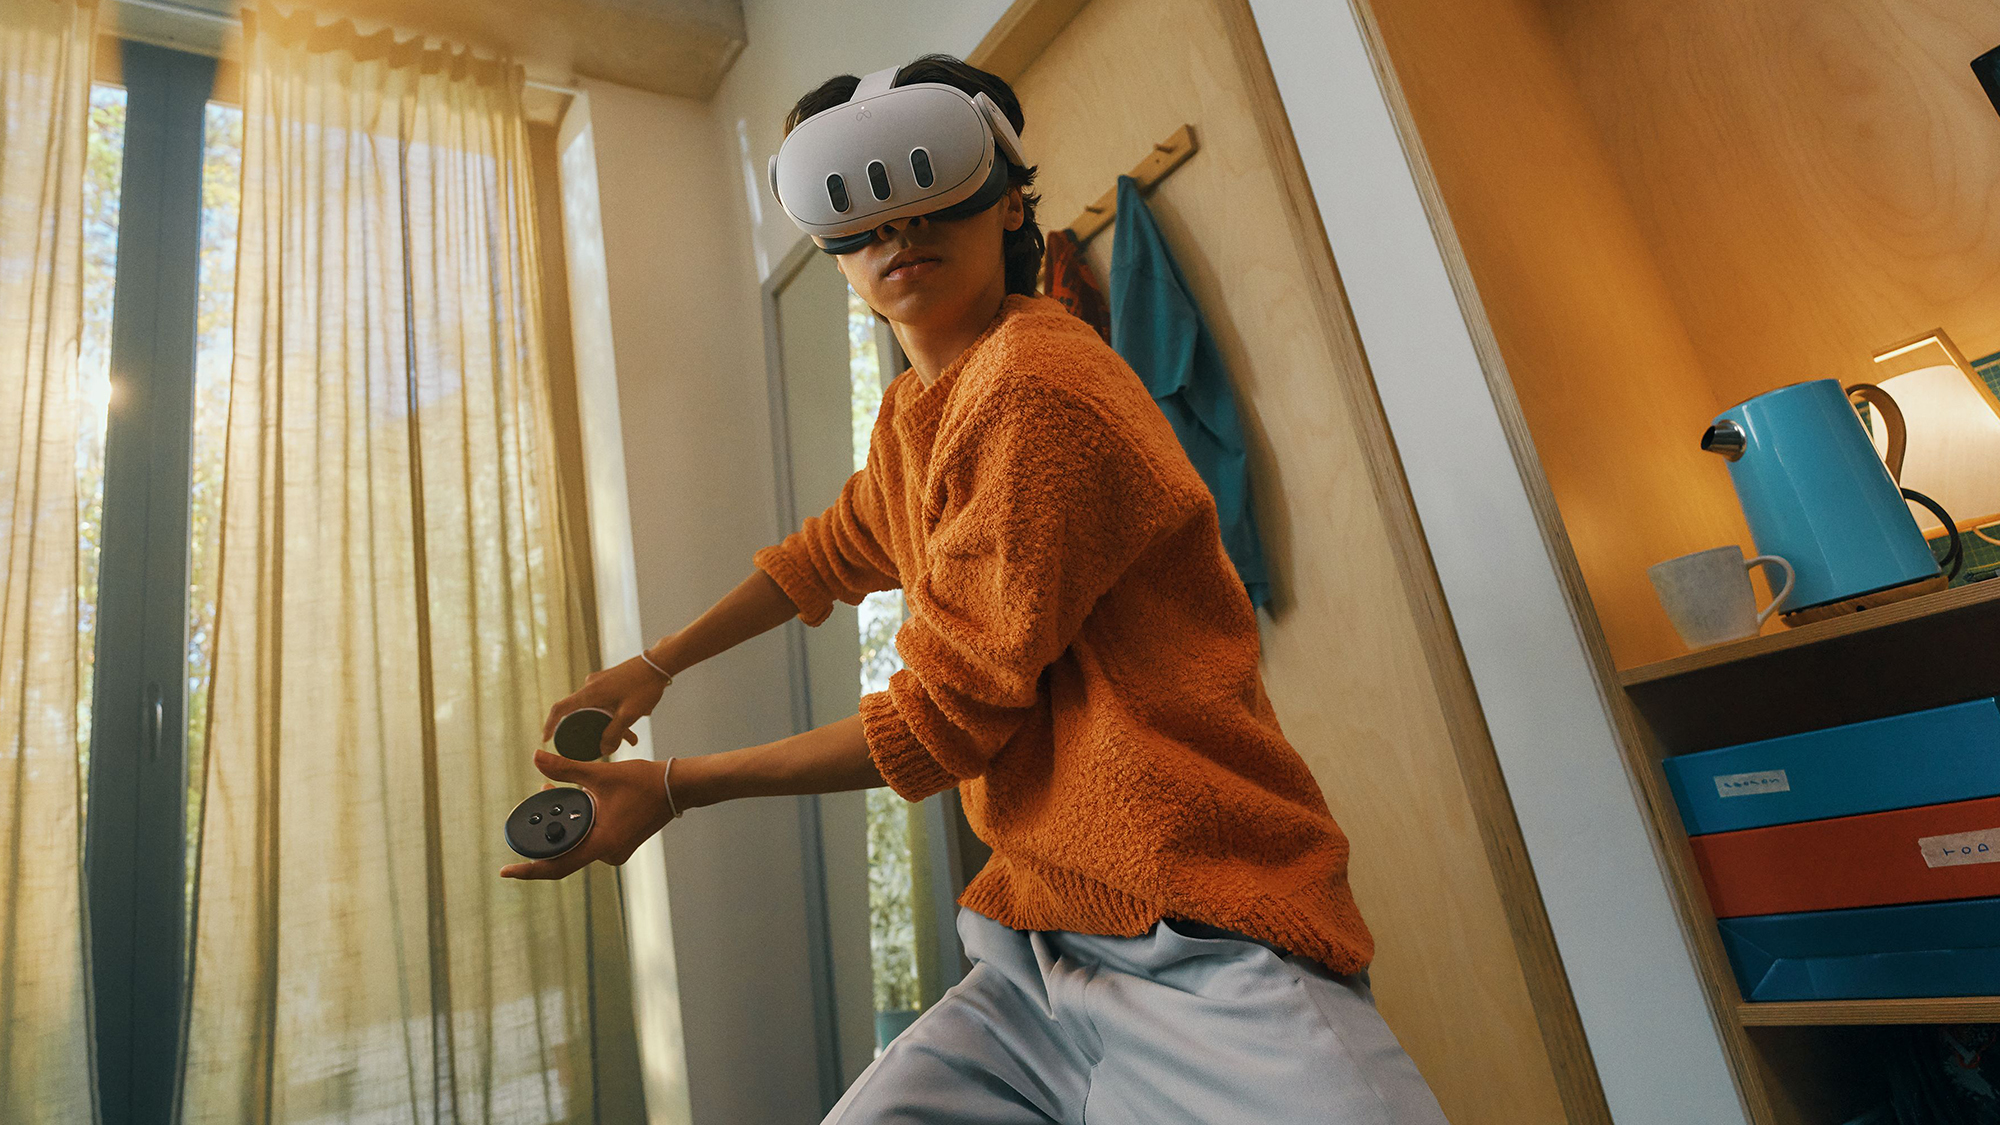 A person wearing an orange sweater and gray pants striking an active pose in a room while wearing and using a Meta Quest 3 headset.